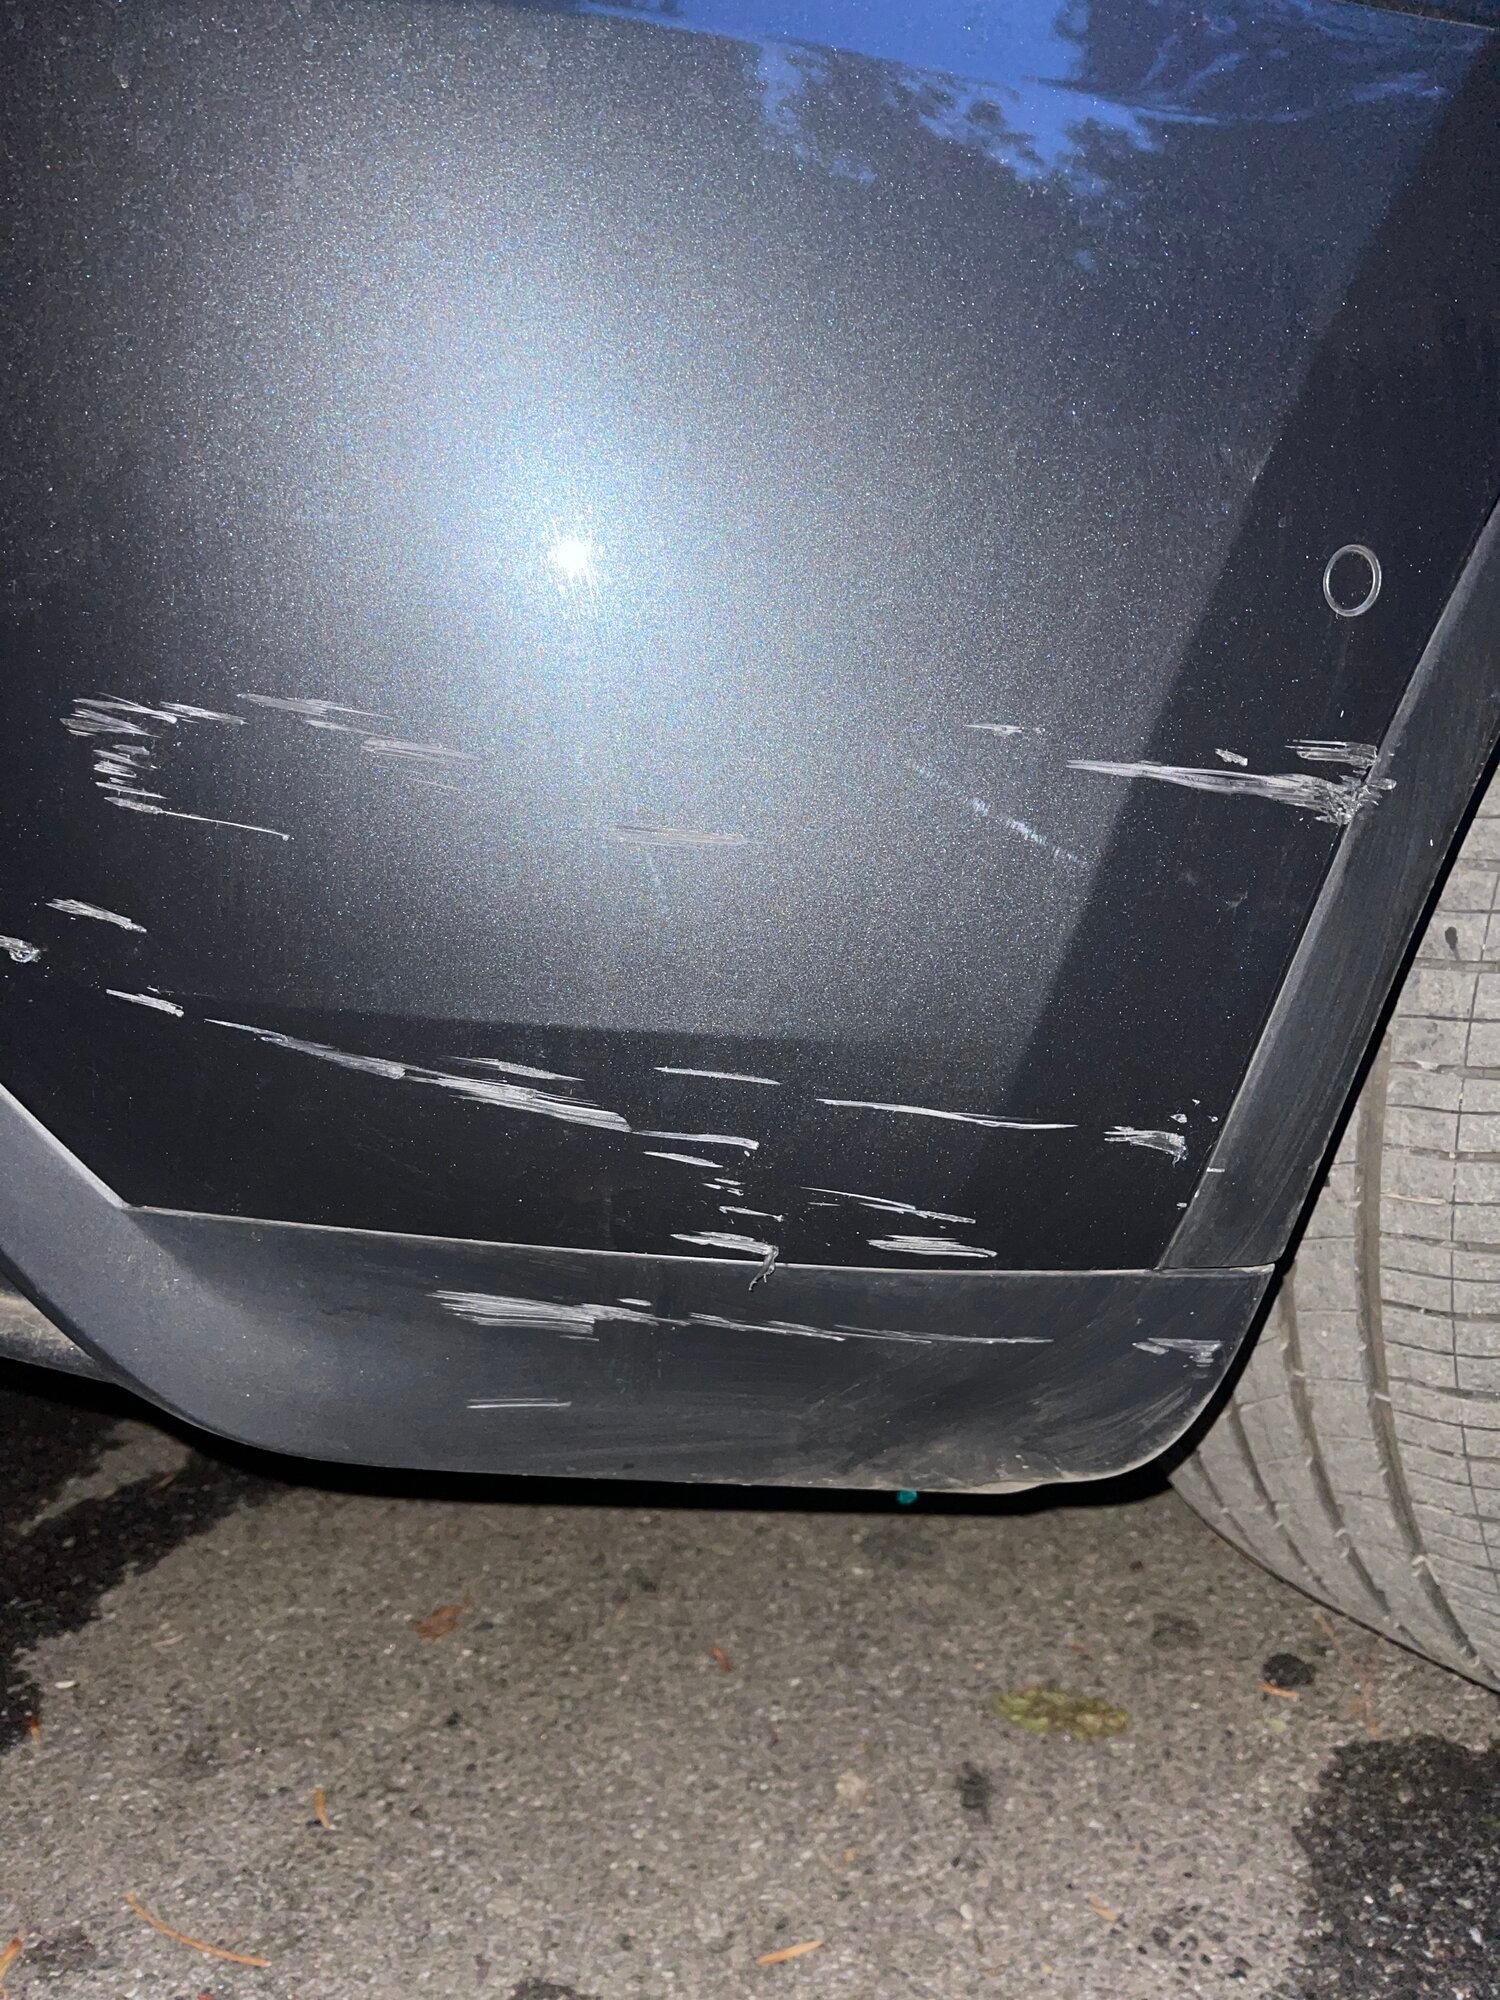 Frequently Asked Questions About Bumper Damage